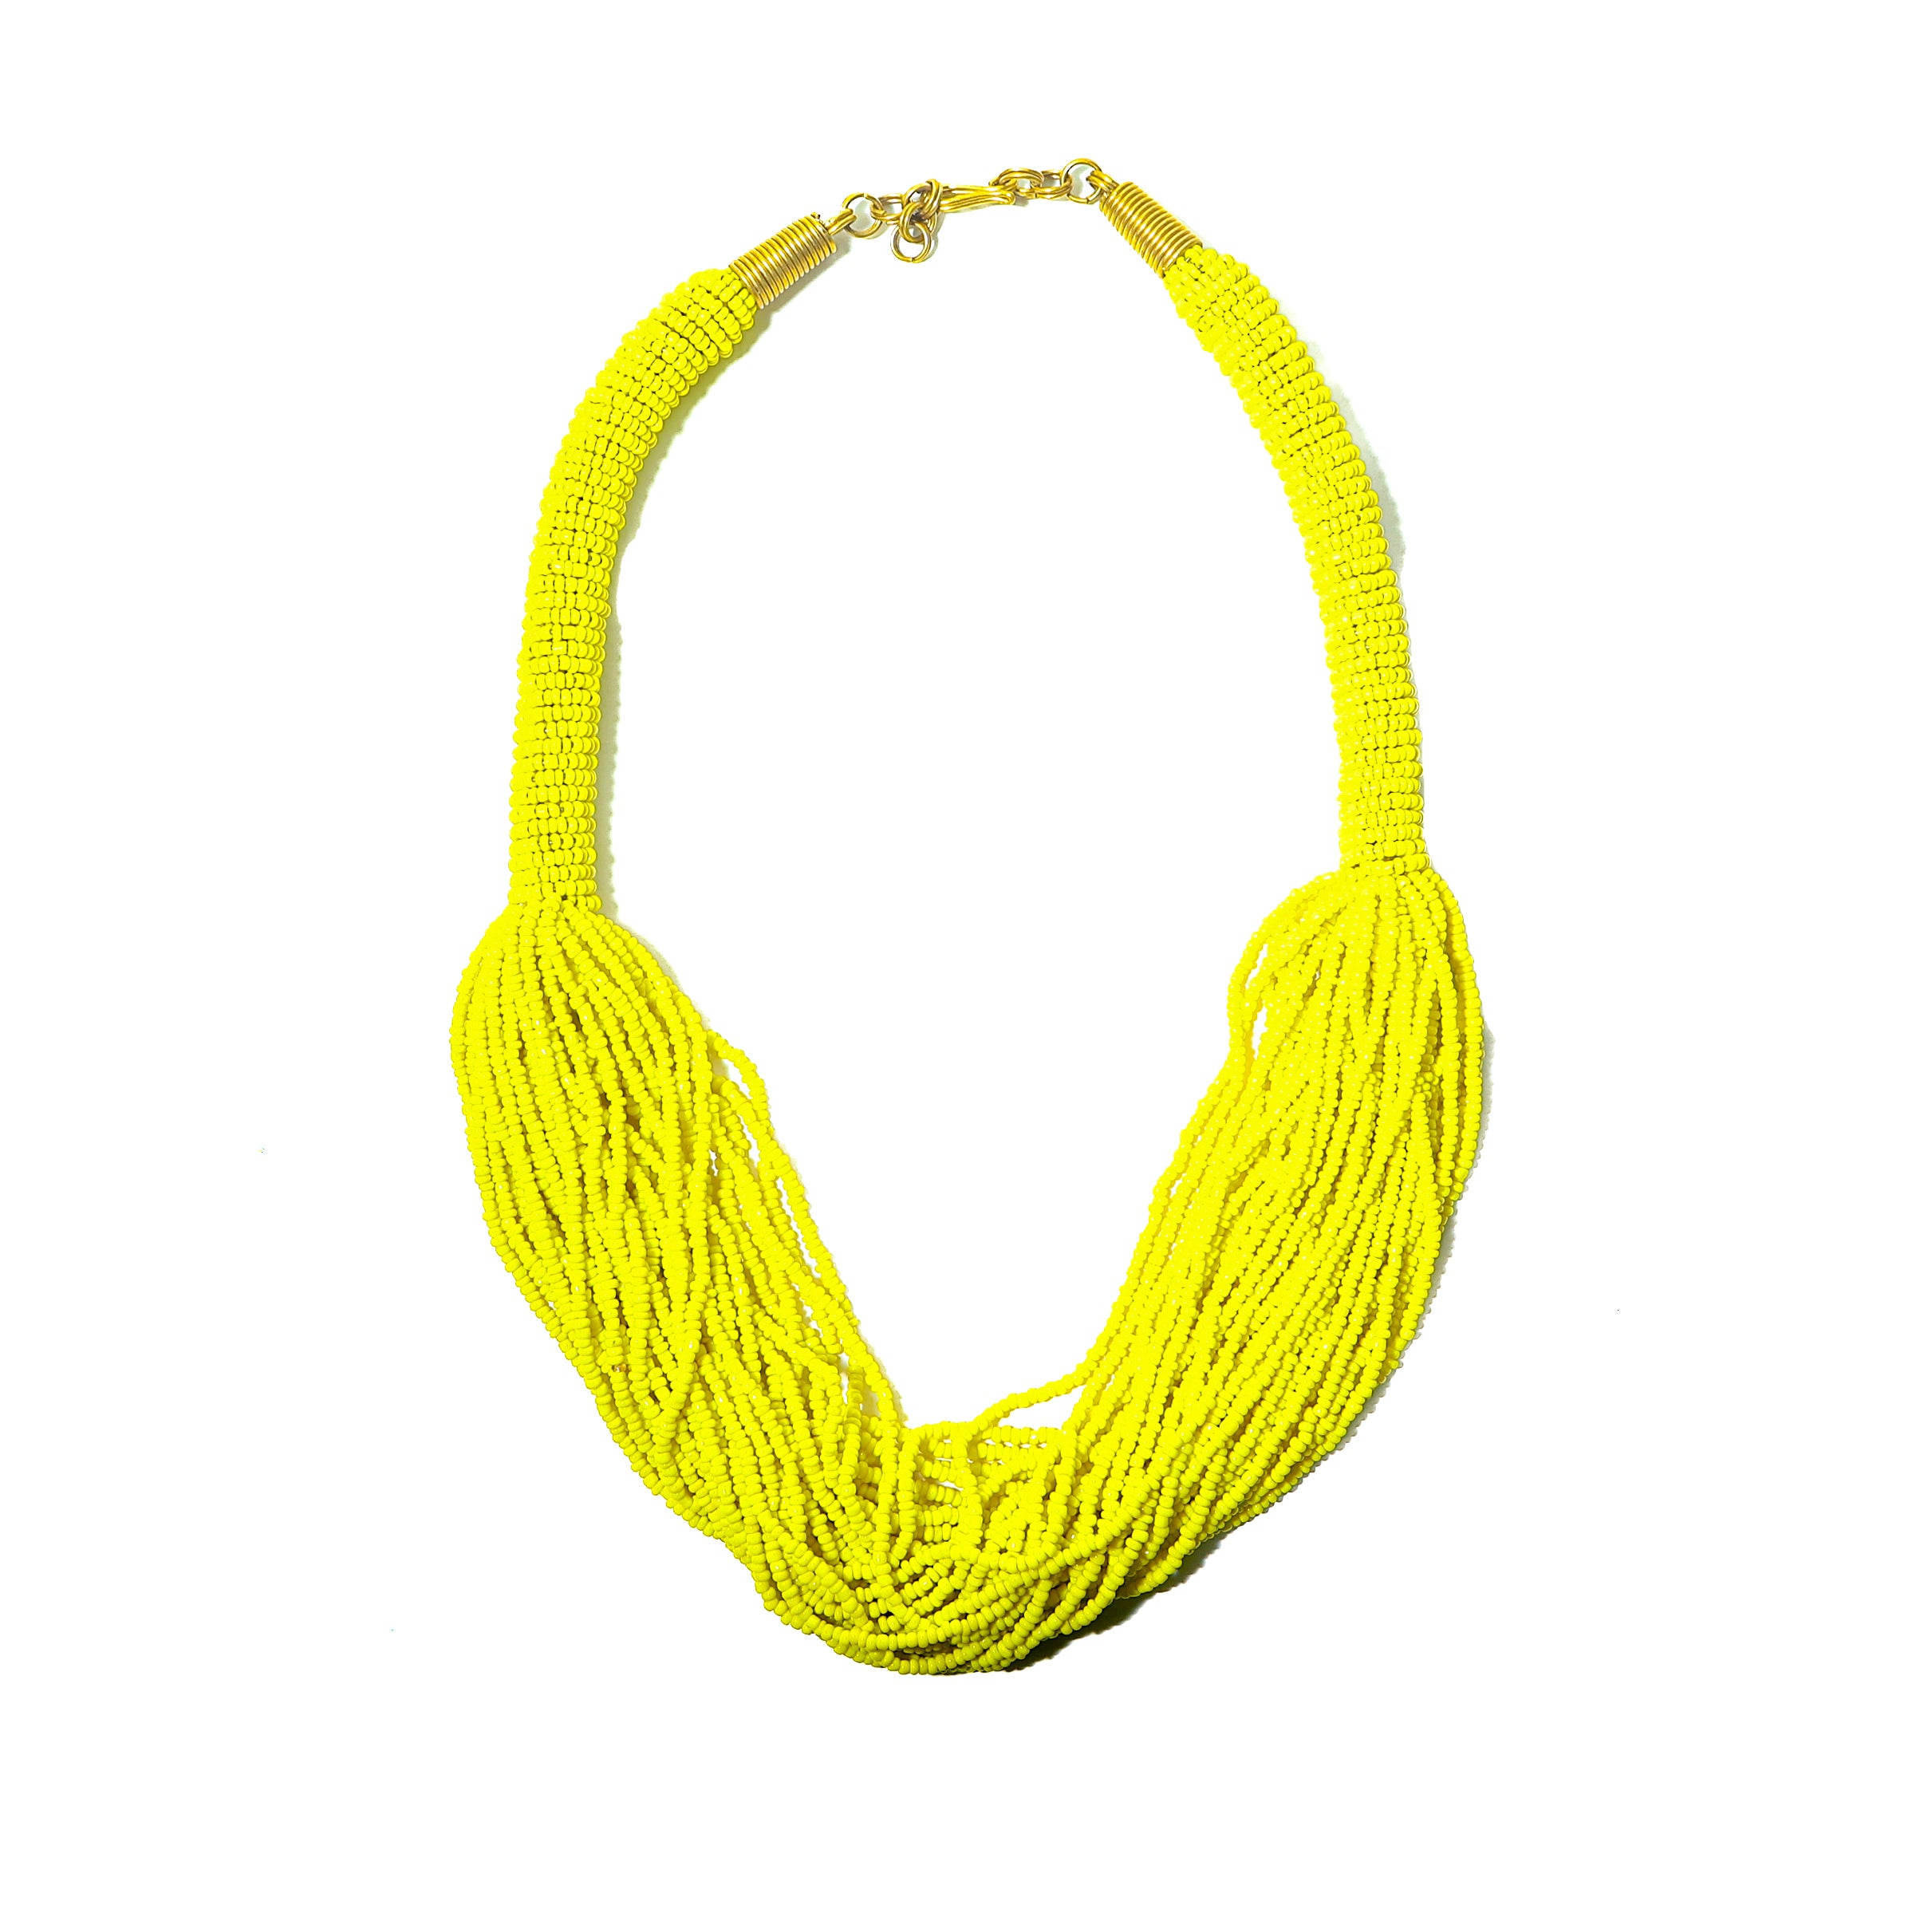 The Kari yellow beaded necklace is perfect for you! Crafted with unparalleled attention to detail, a statement piece that exudes African-inspired glamor.